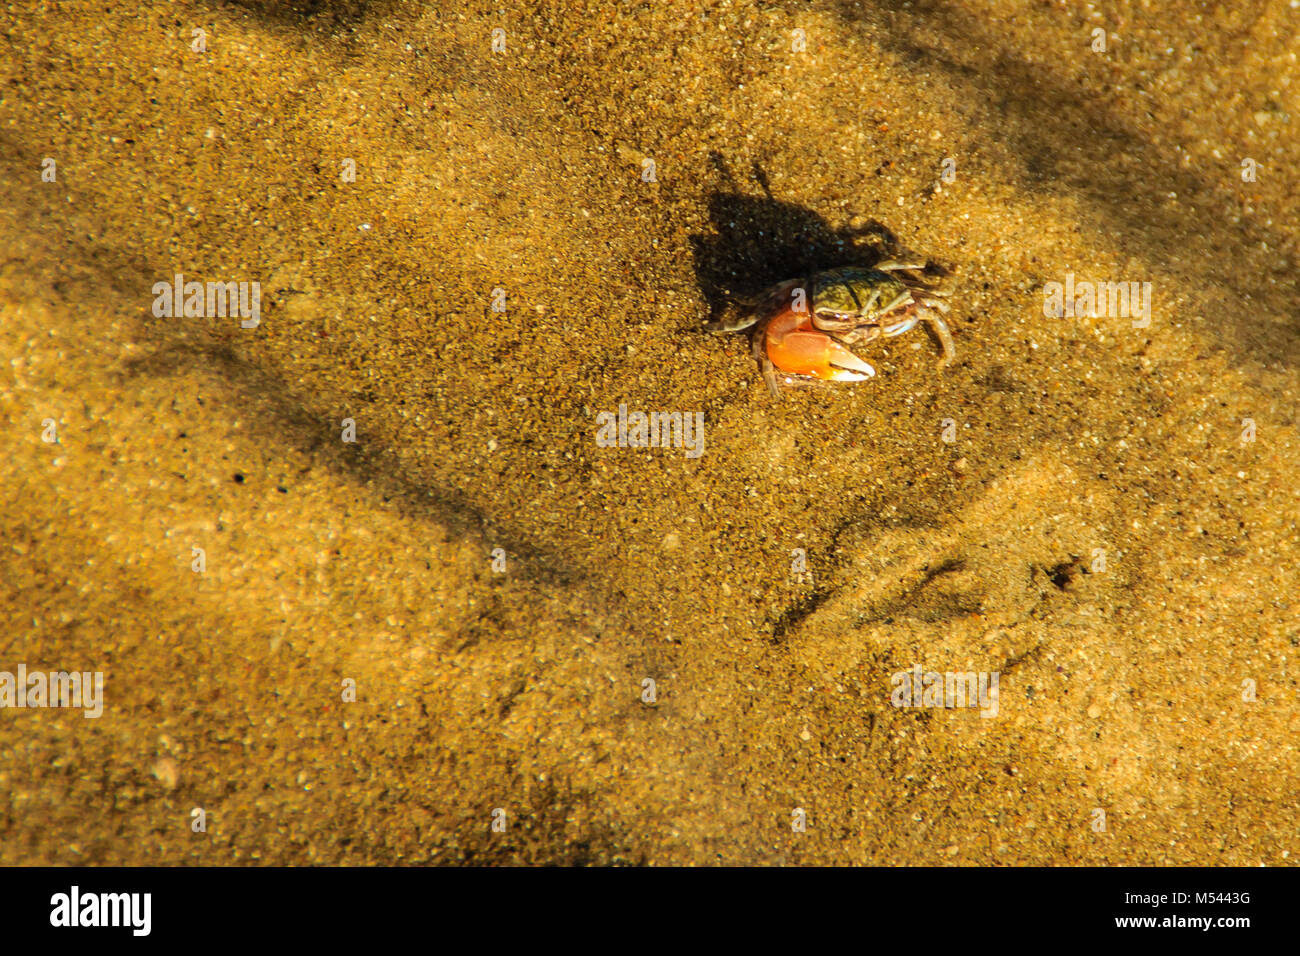 Close up Meder's Mangrove Crab, or Salt March Crab (Sesarma mederi) on the beach when the sea water receded. Stock Photo